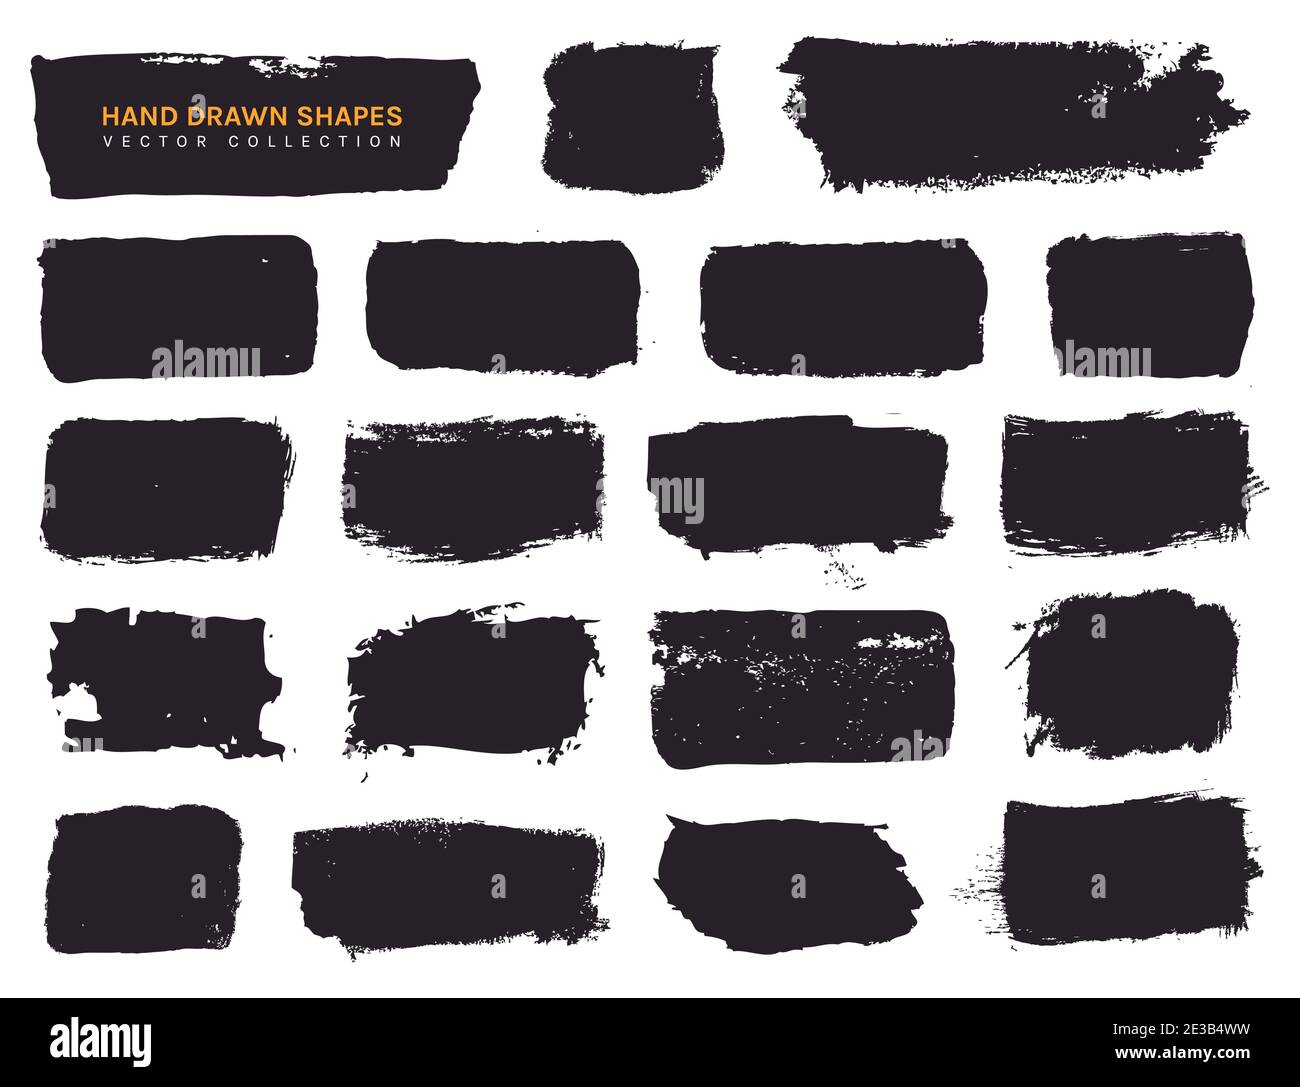 Paint brush stains and grunge hand drawn shapes for frames, banners, labels, text boxes, clipping masks or other art designs. Vector isolated textures Stock Vector